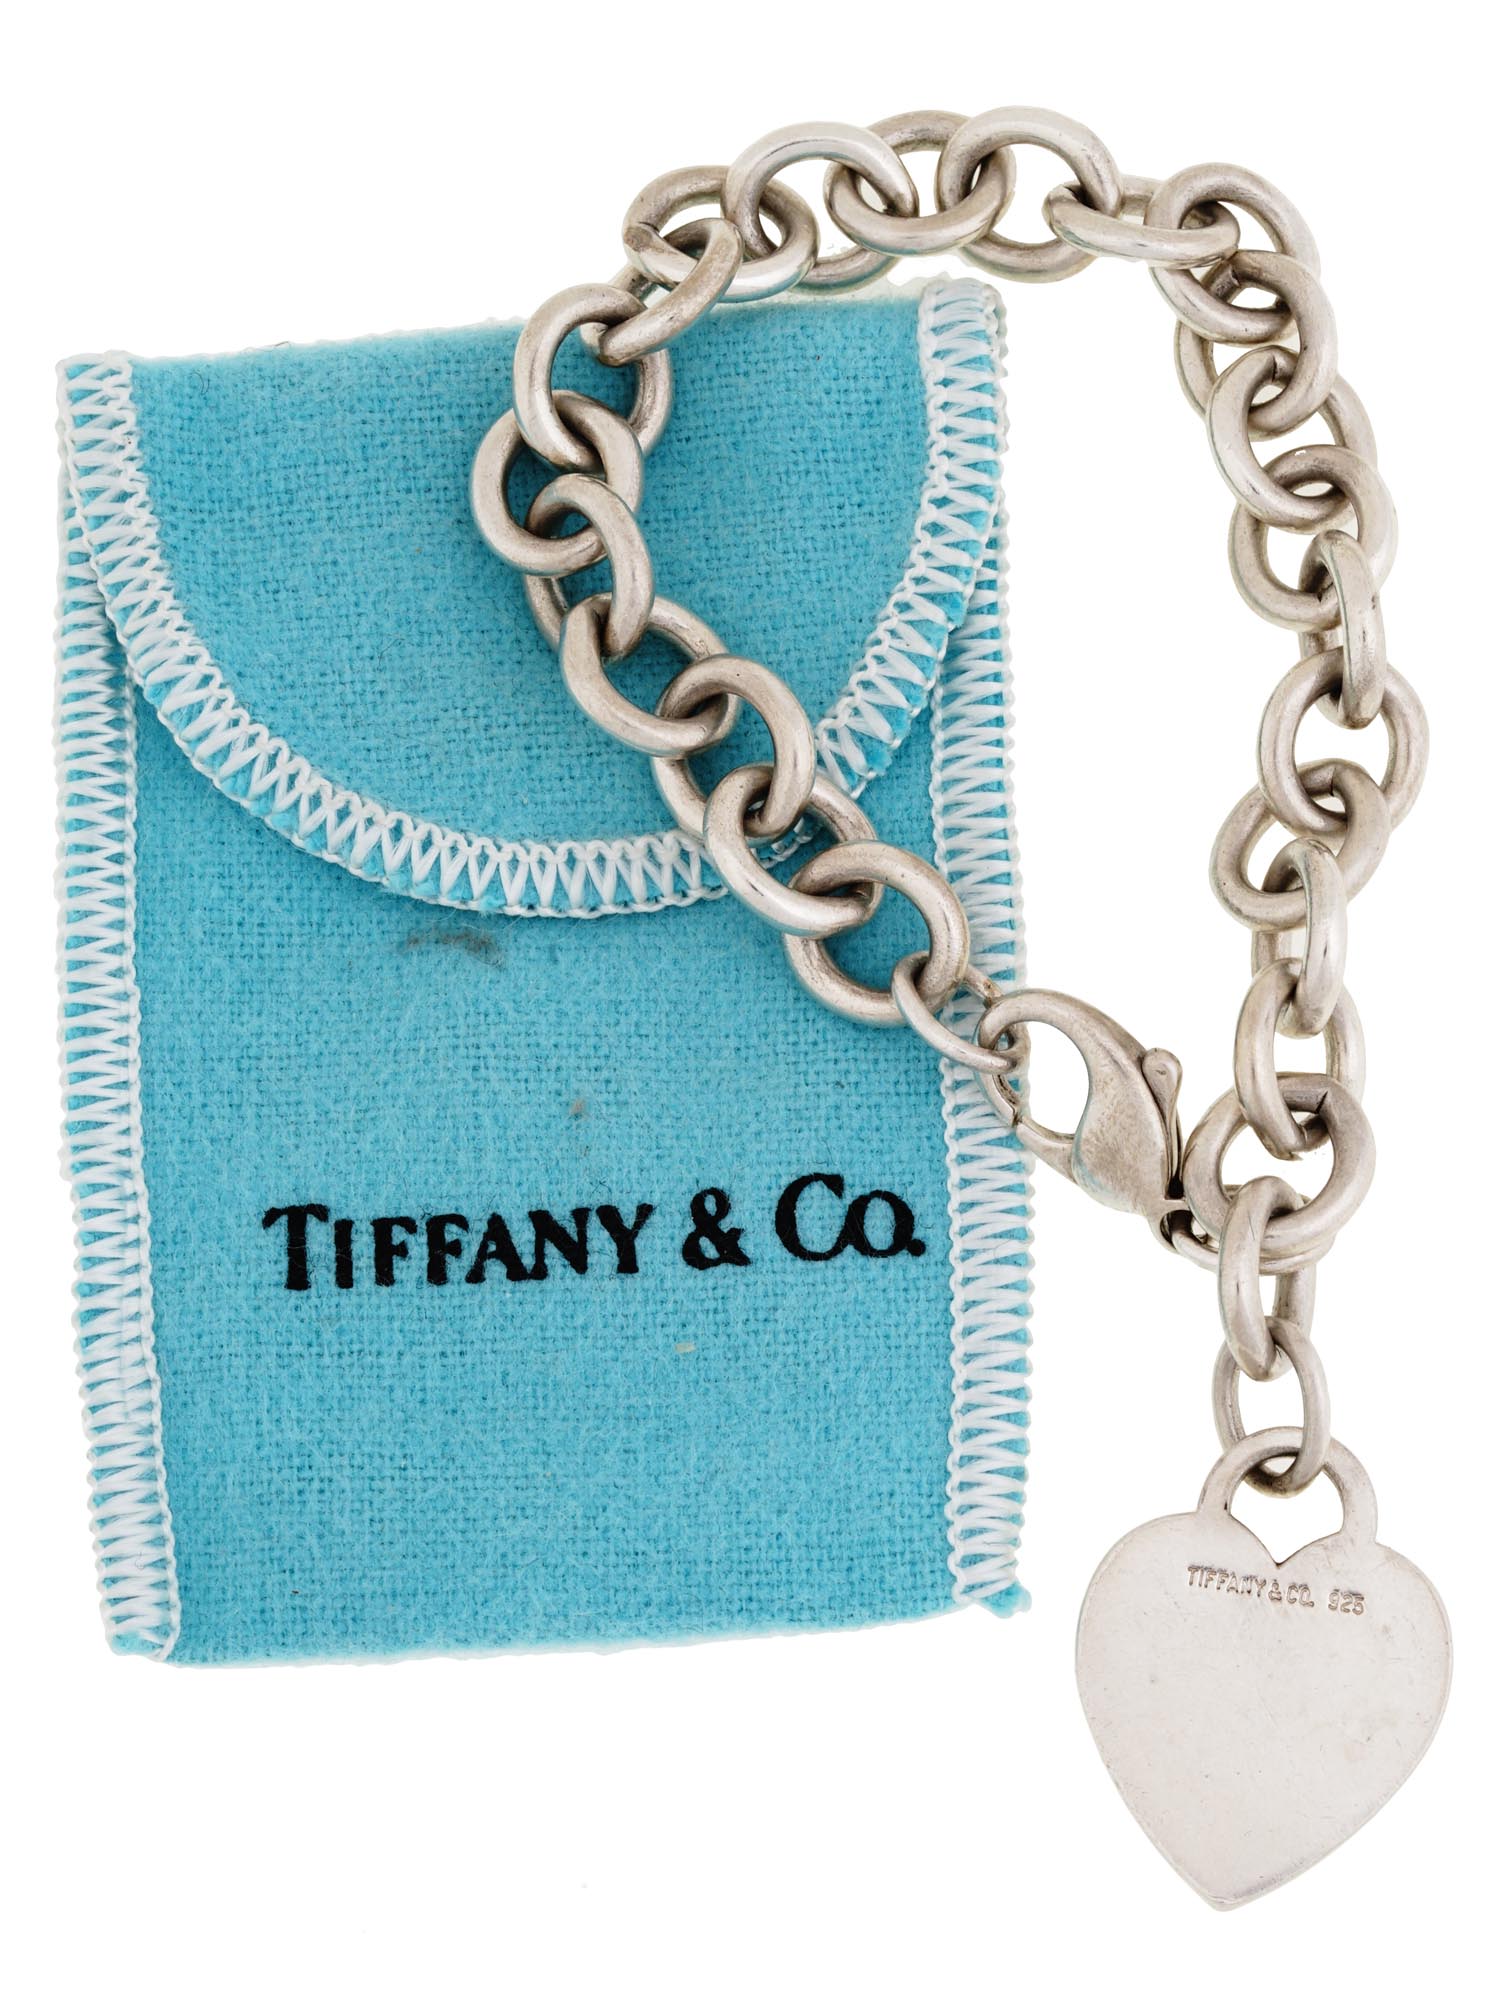 TIFFANY STERLING SILVER BRACELET WITH HEART CHARM PIC-0